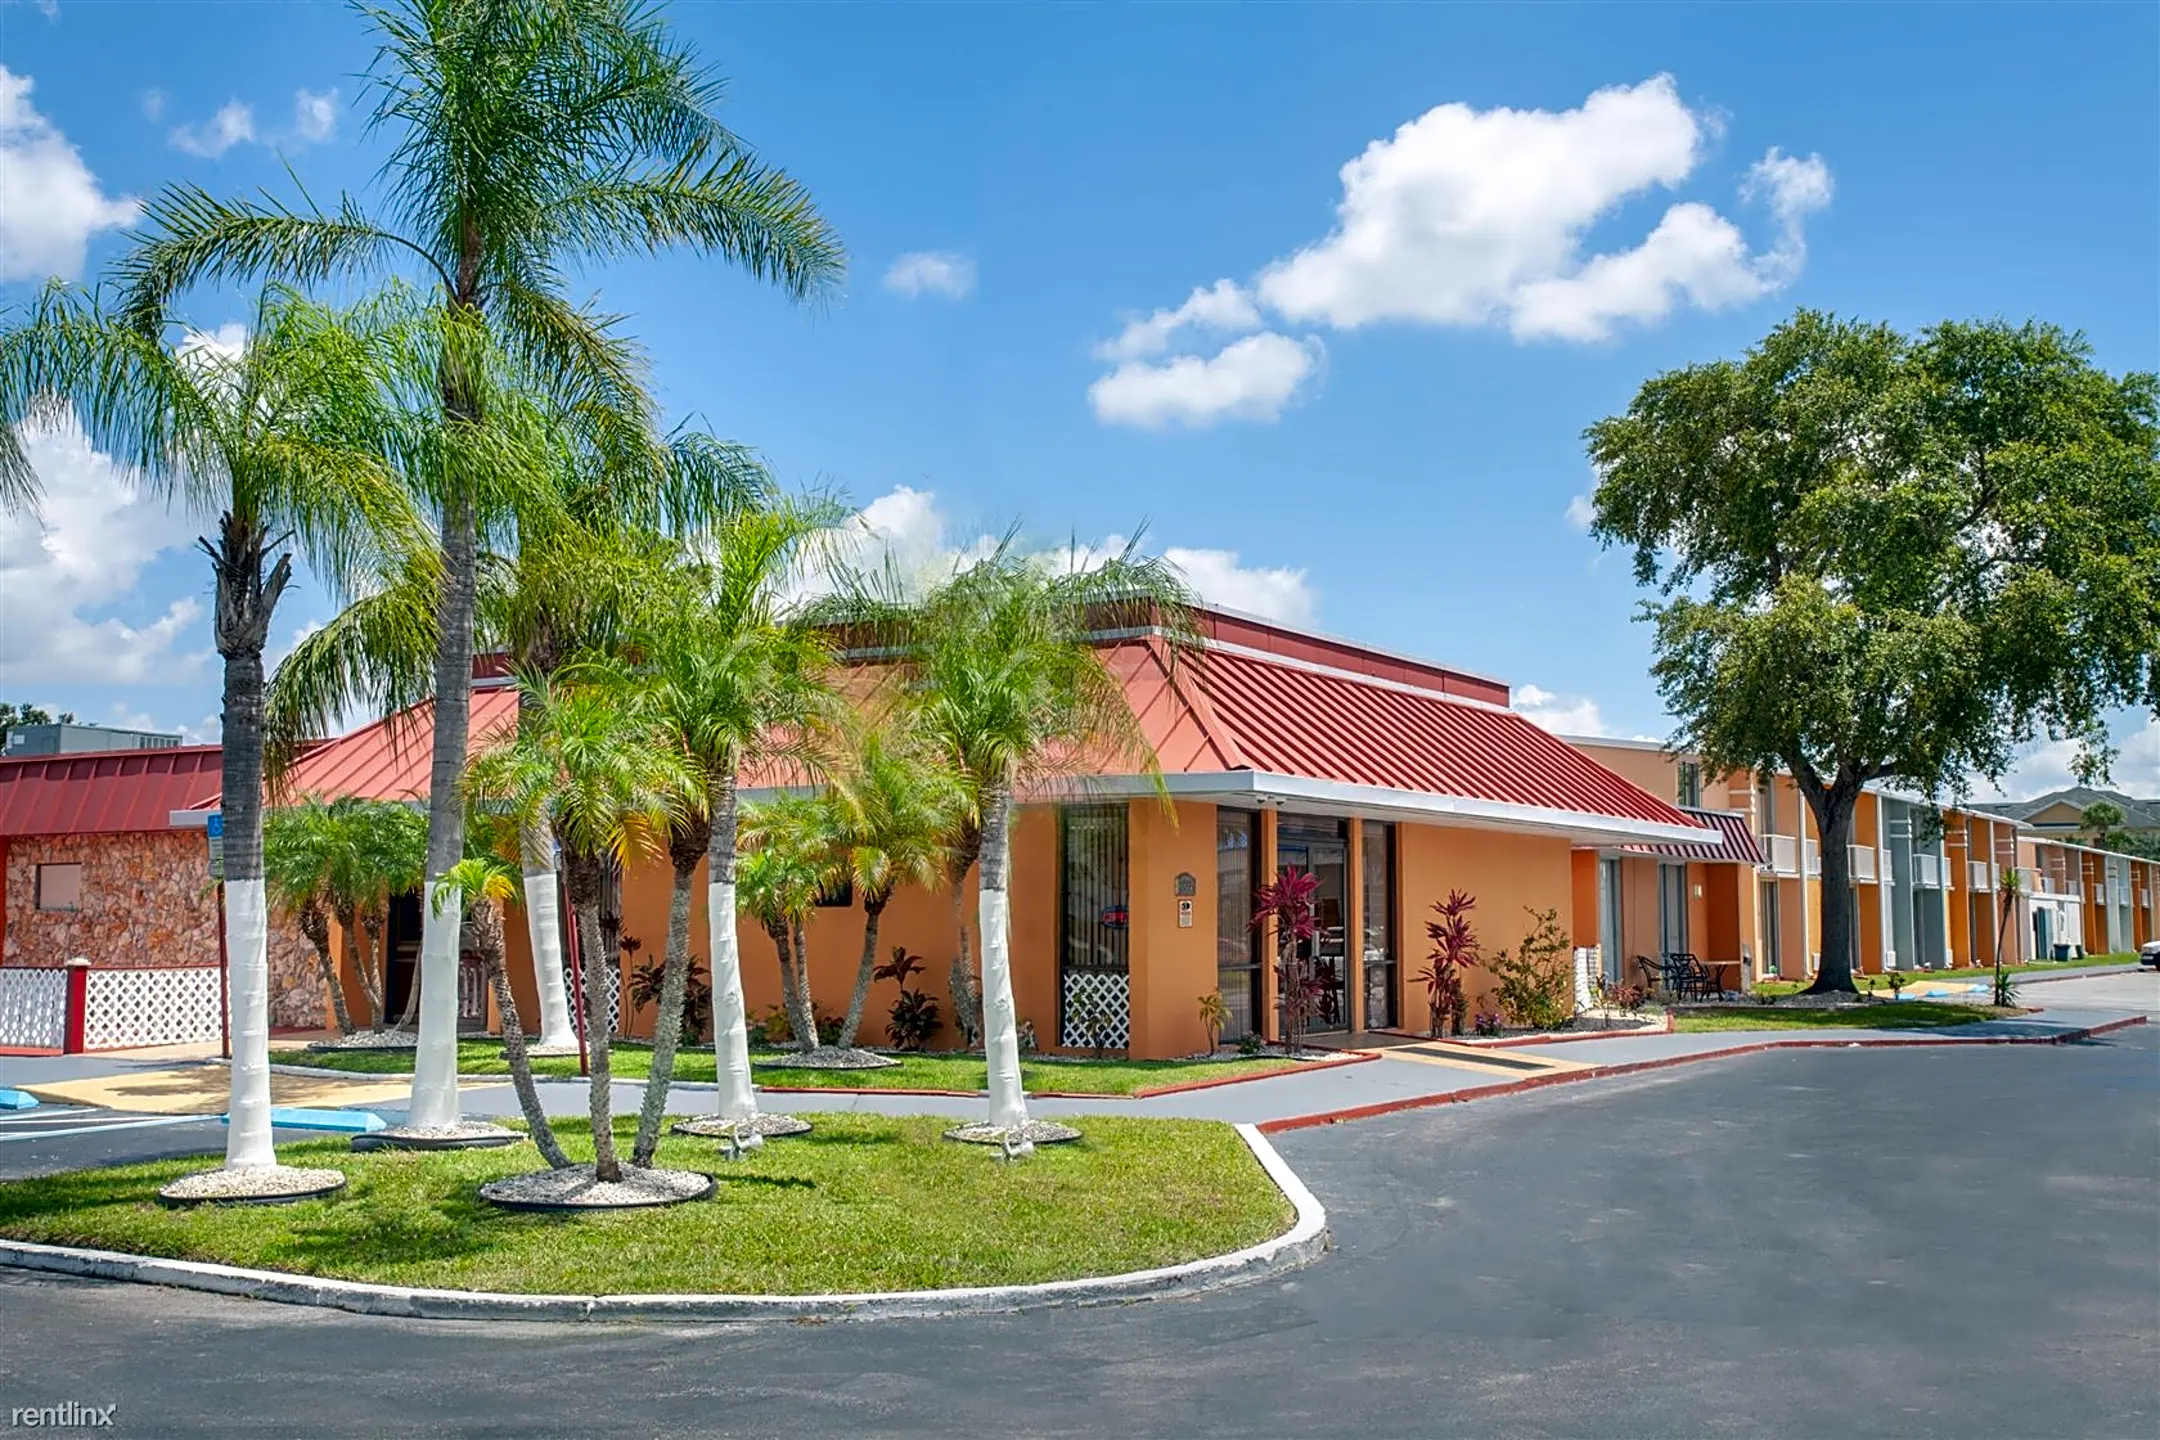 Building - Stayable Suites Kissimmee - Kissimmee, FL